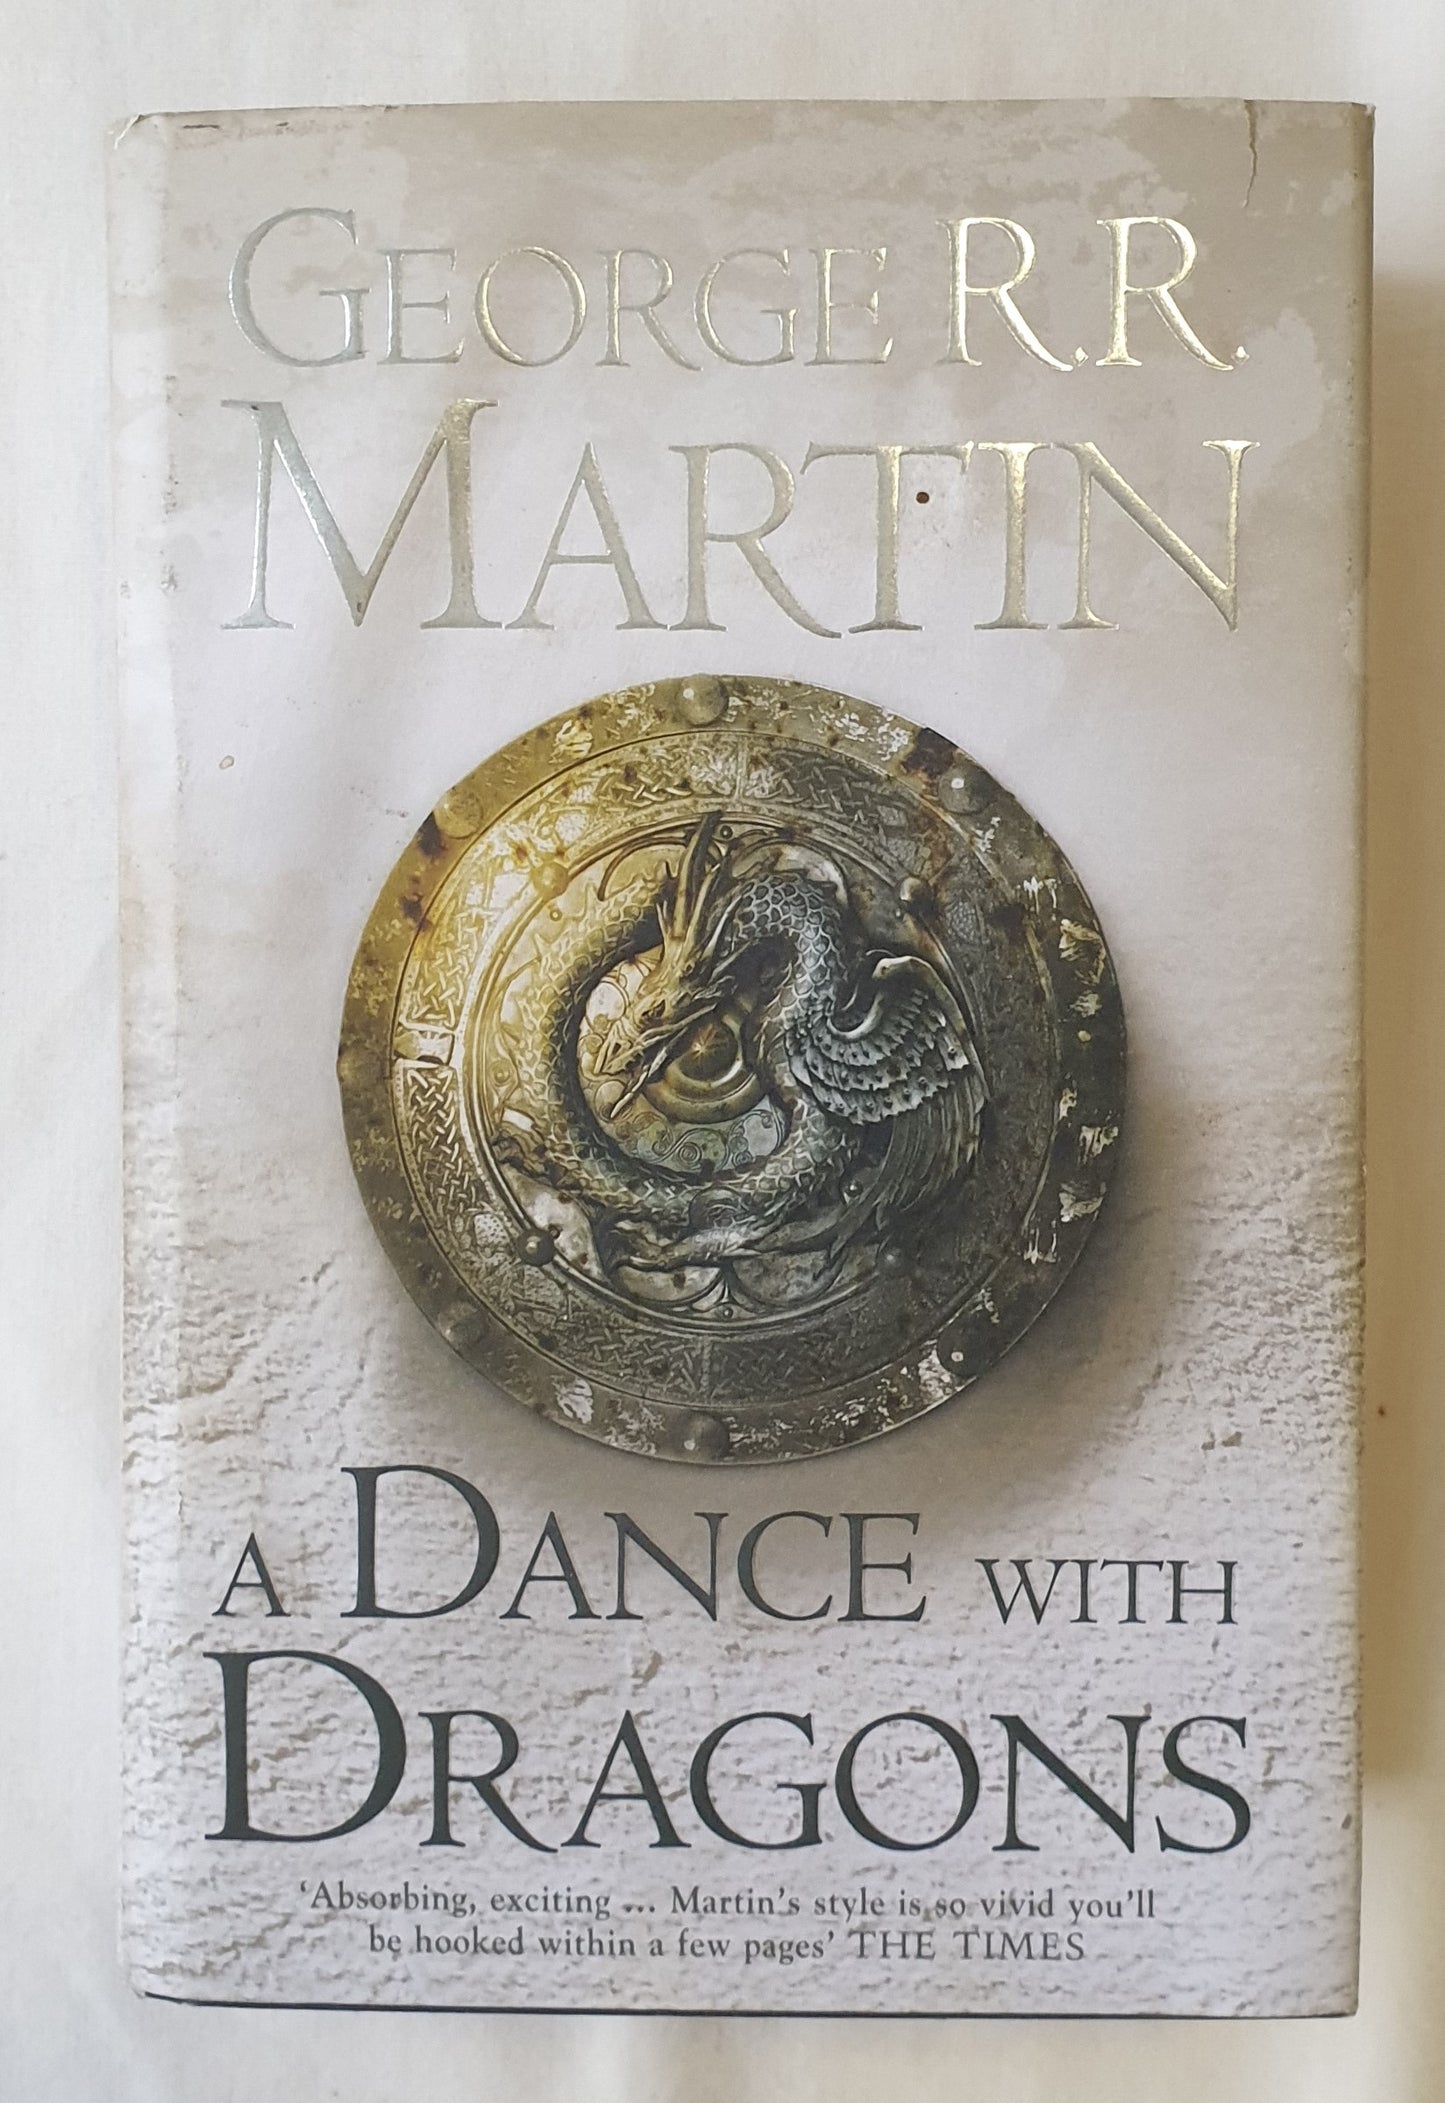 A Dance With Dragons  by George R. R. Martin  Book Five of A Song of Ice and Fire  (A Game of Thrones)